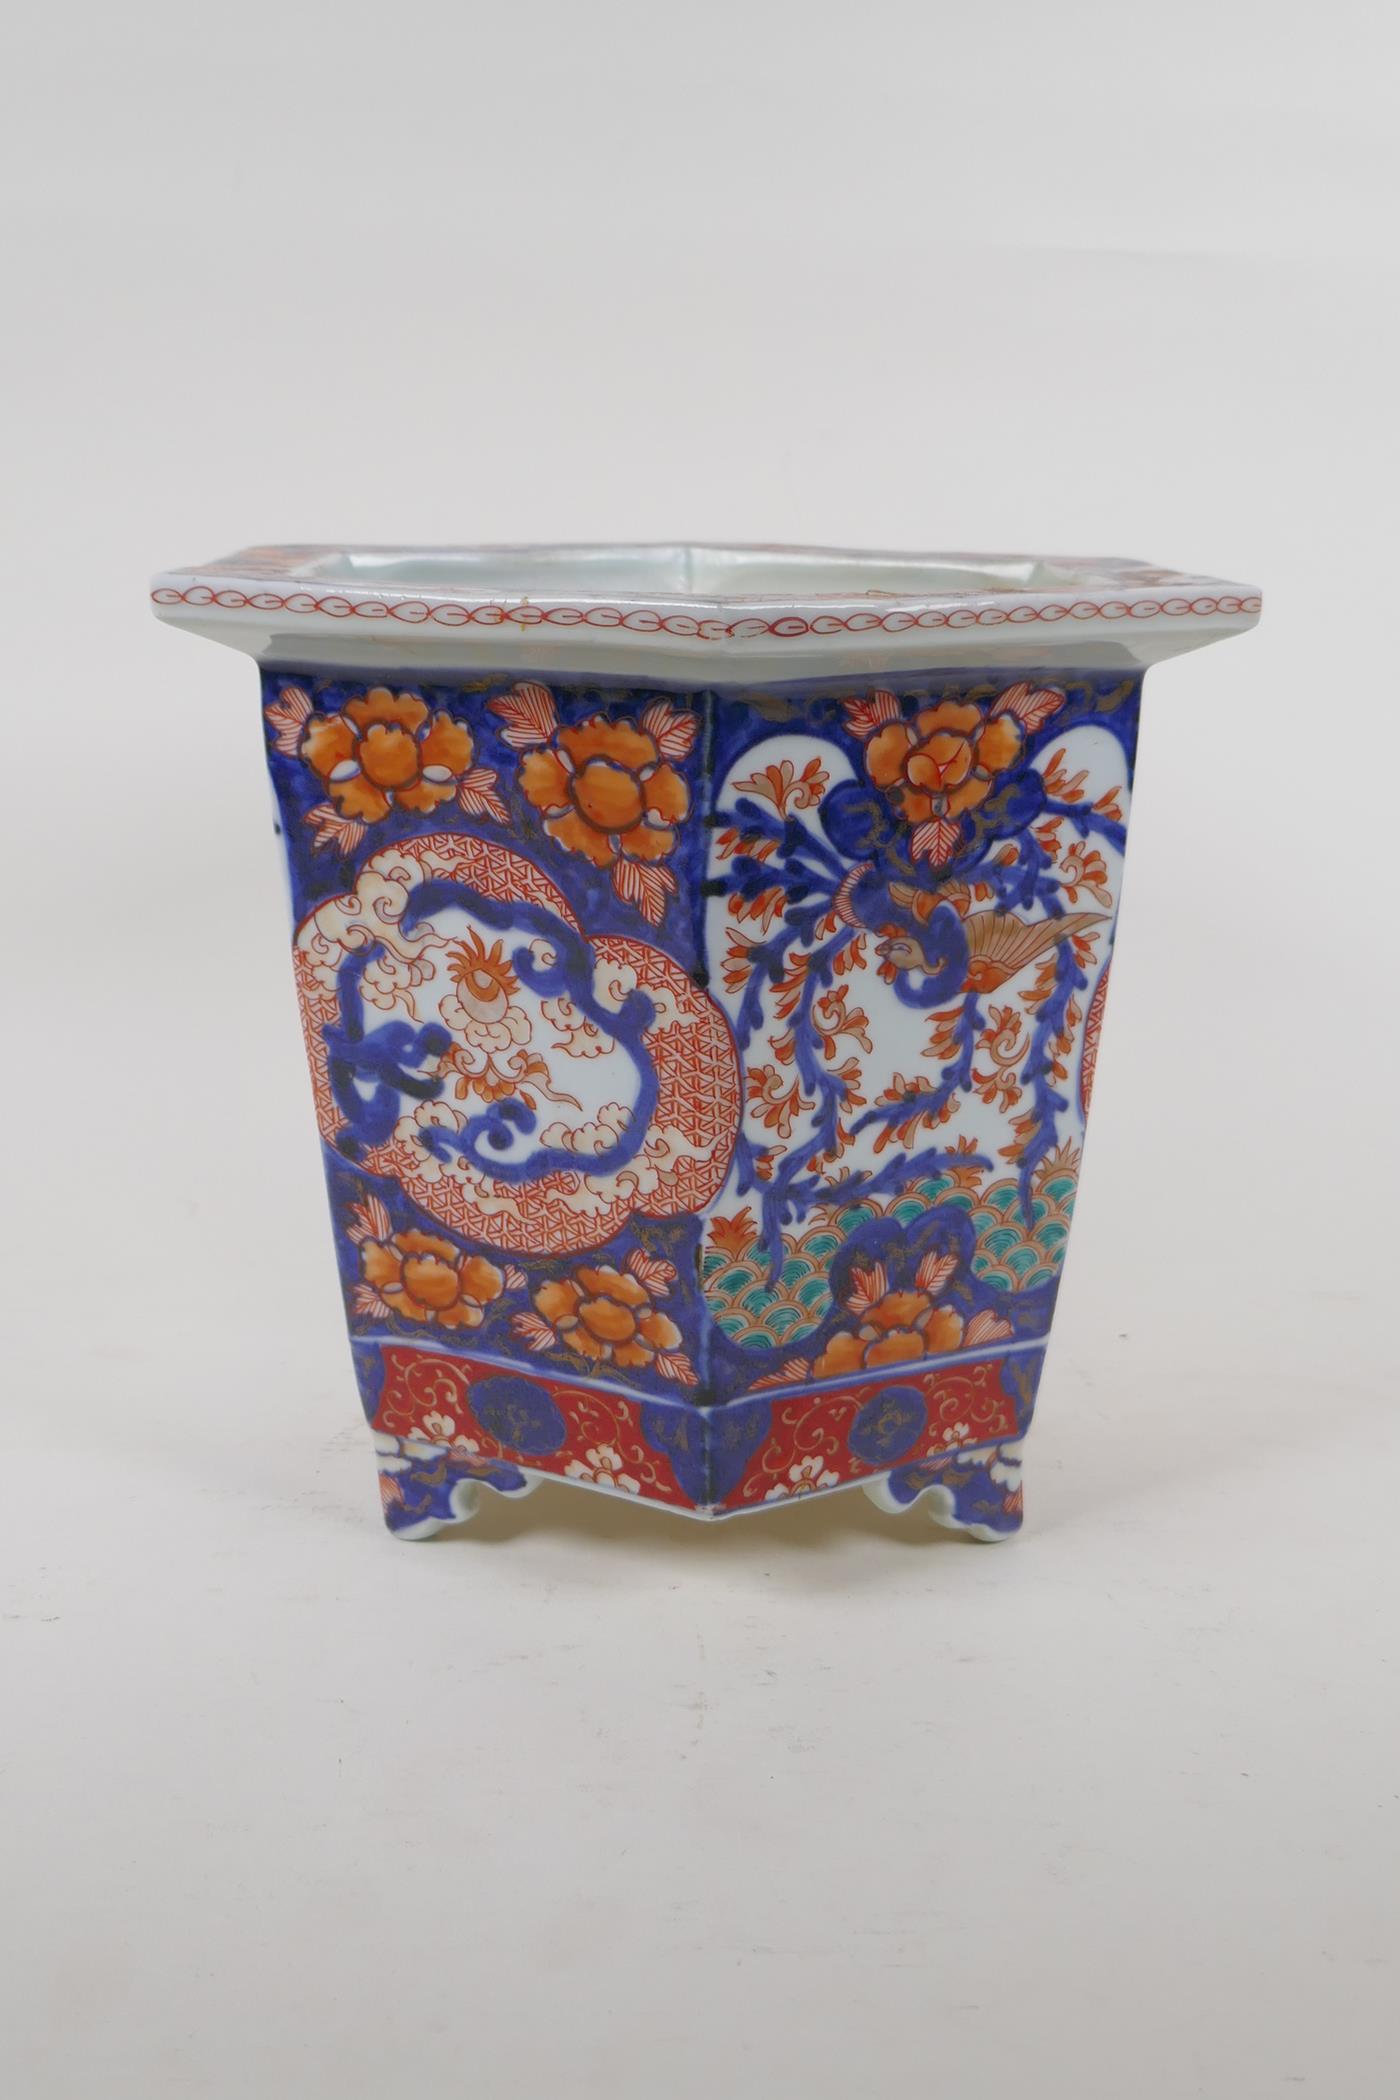 A C19th Chinese Imari porcelain planter of hexagonal form, with phoenix and floral decorative - Image 2 of 6